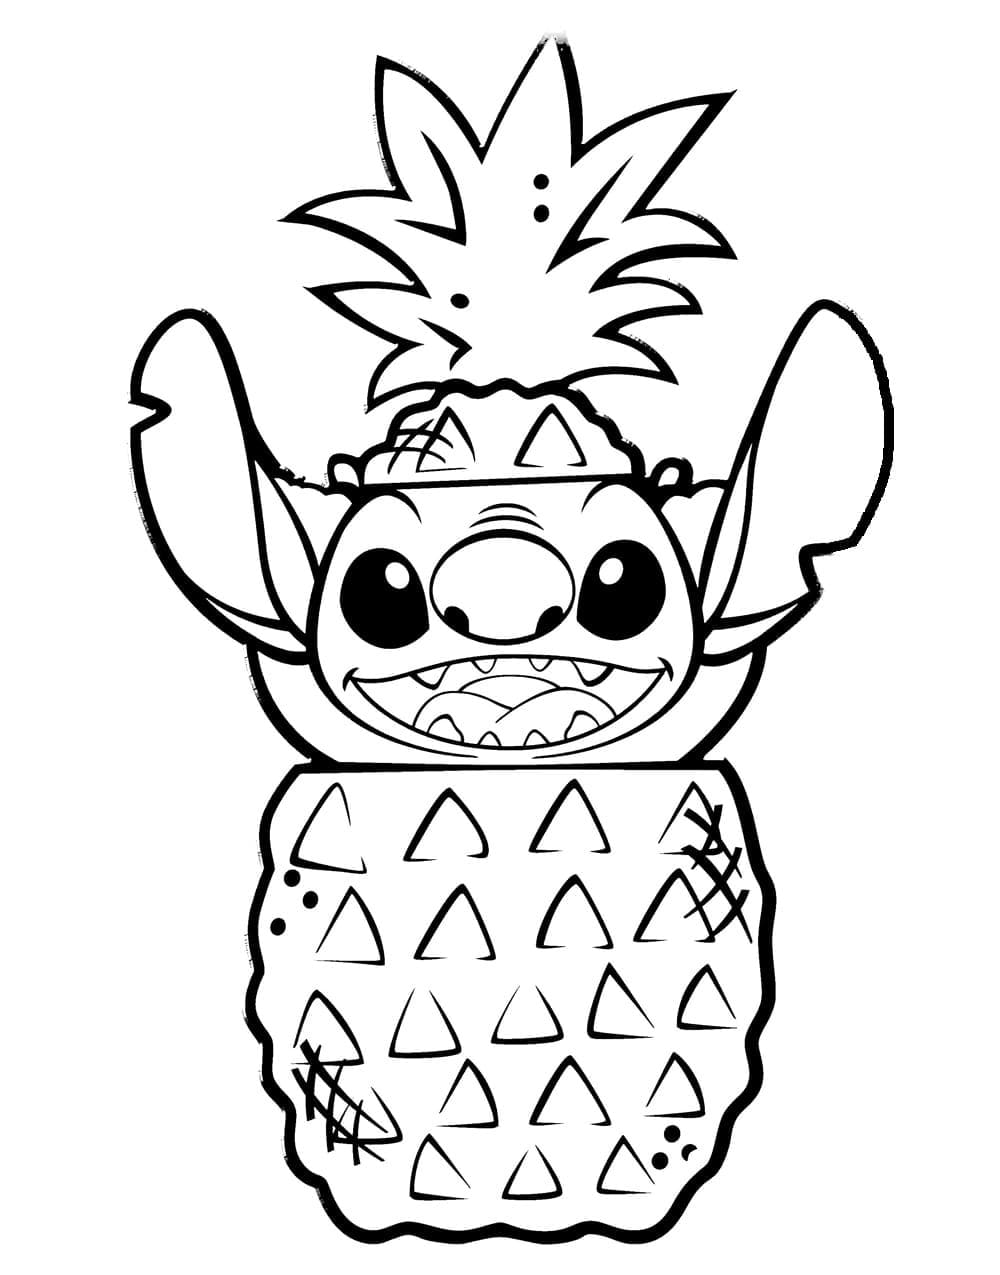 Very cute stitch coloring page